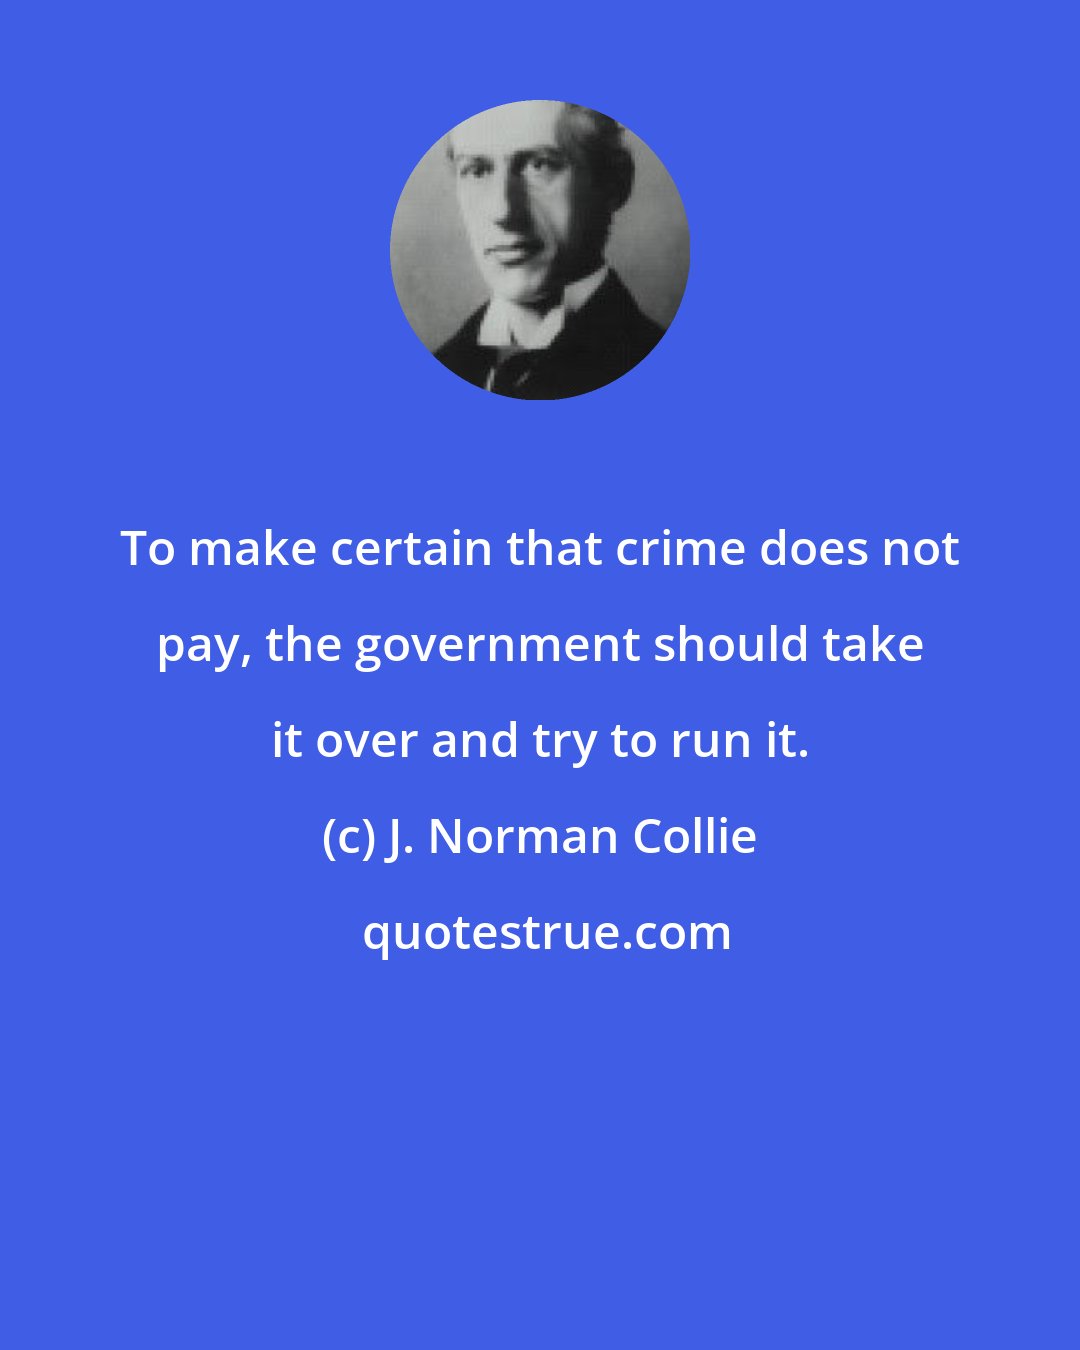 J. Norman Collie: To make certain that crime does not pay, the government should take it over and try to run it.